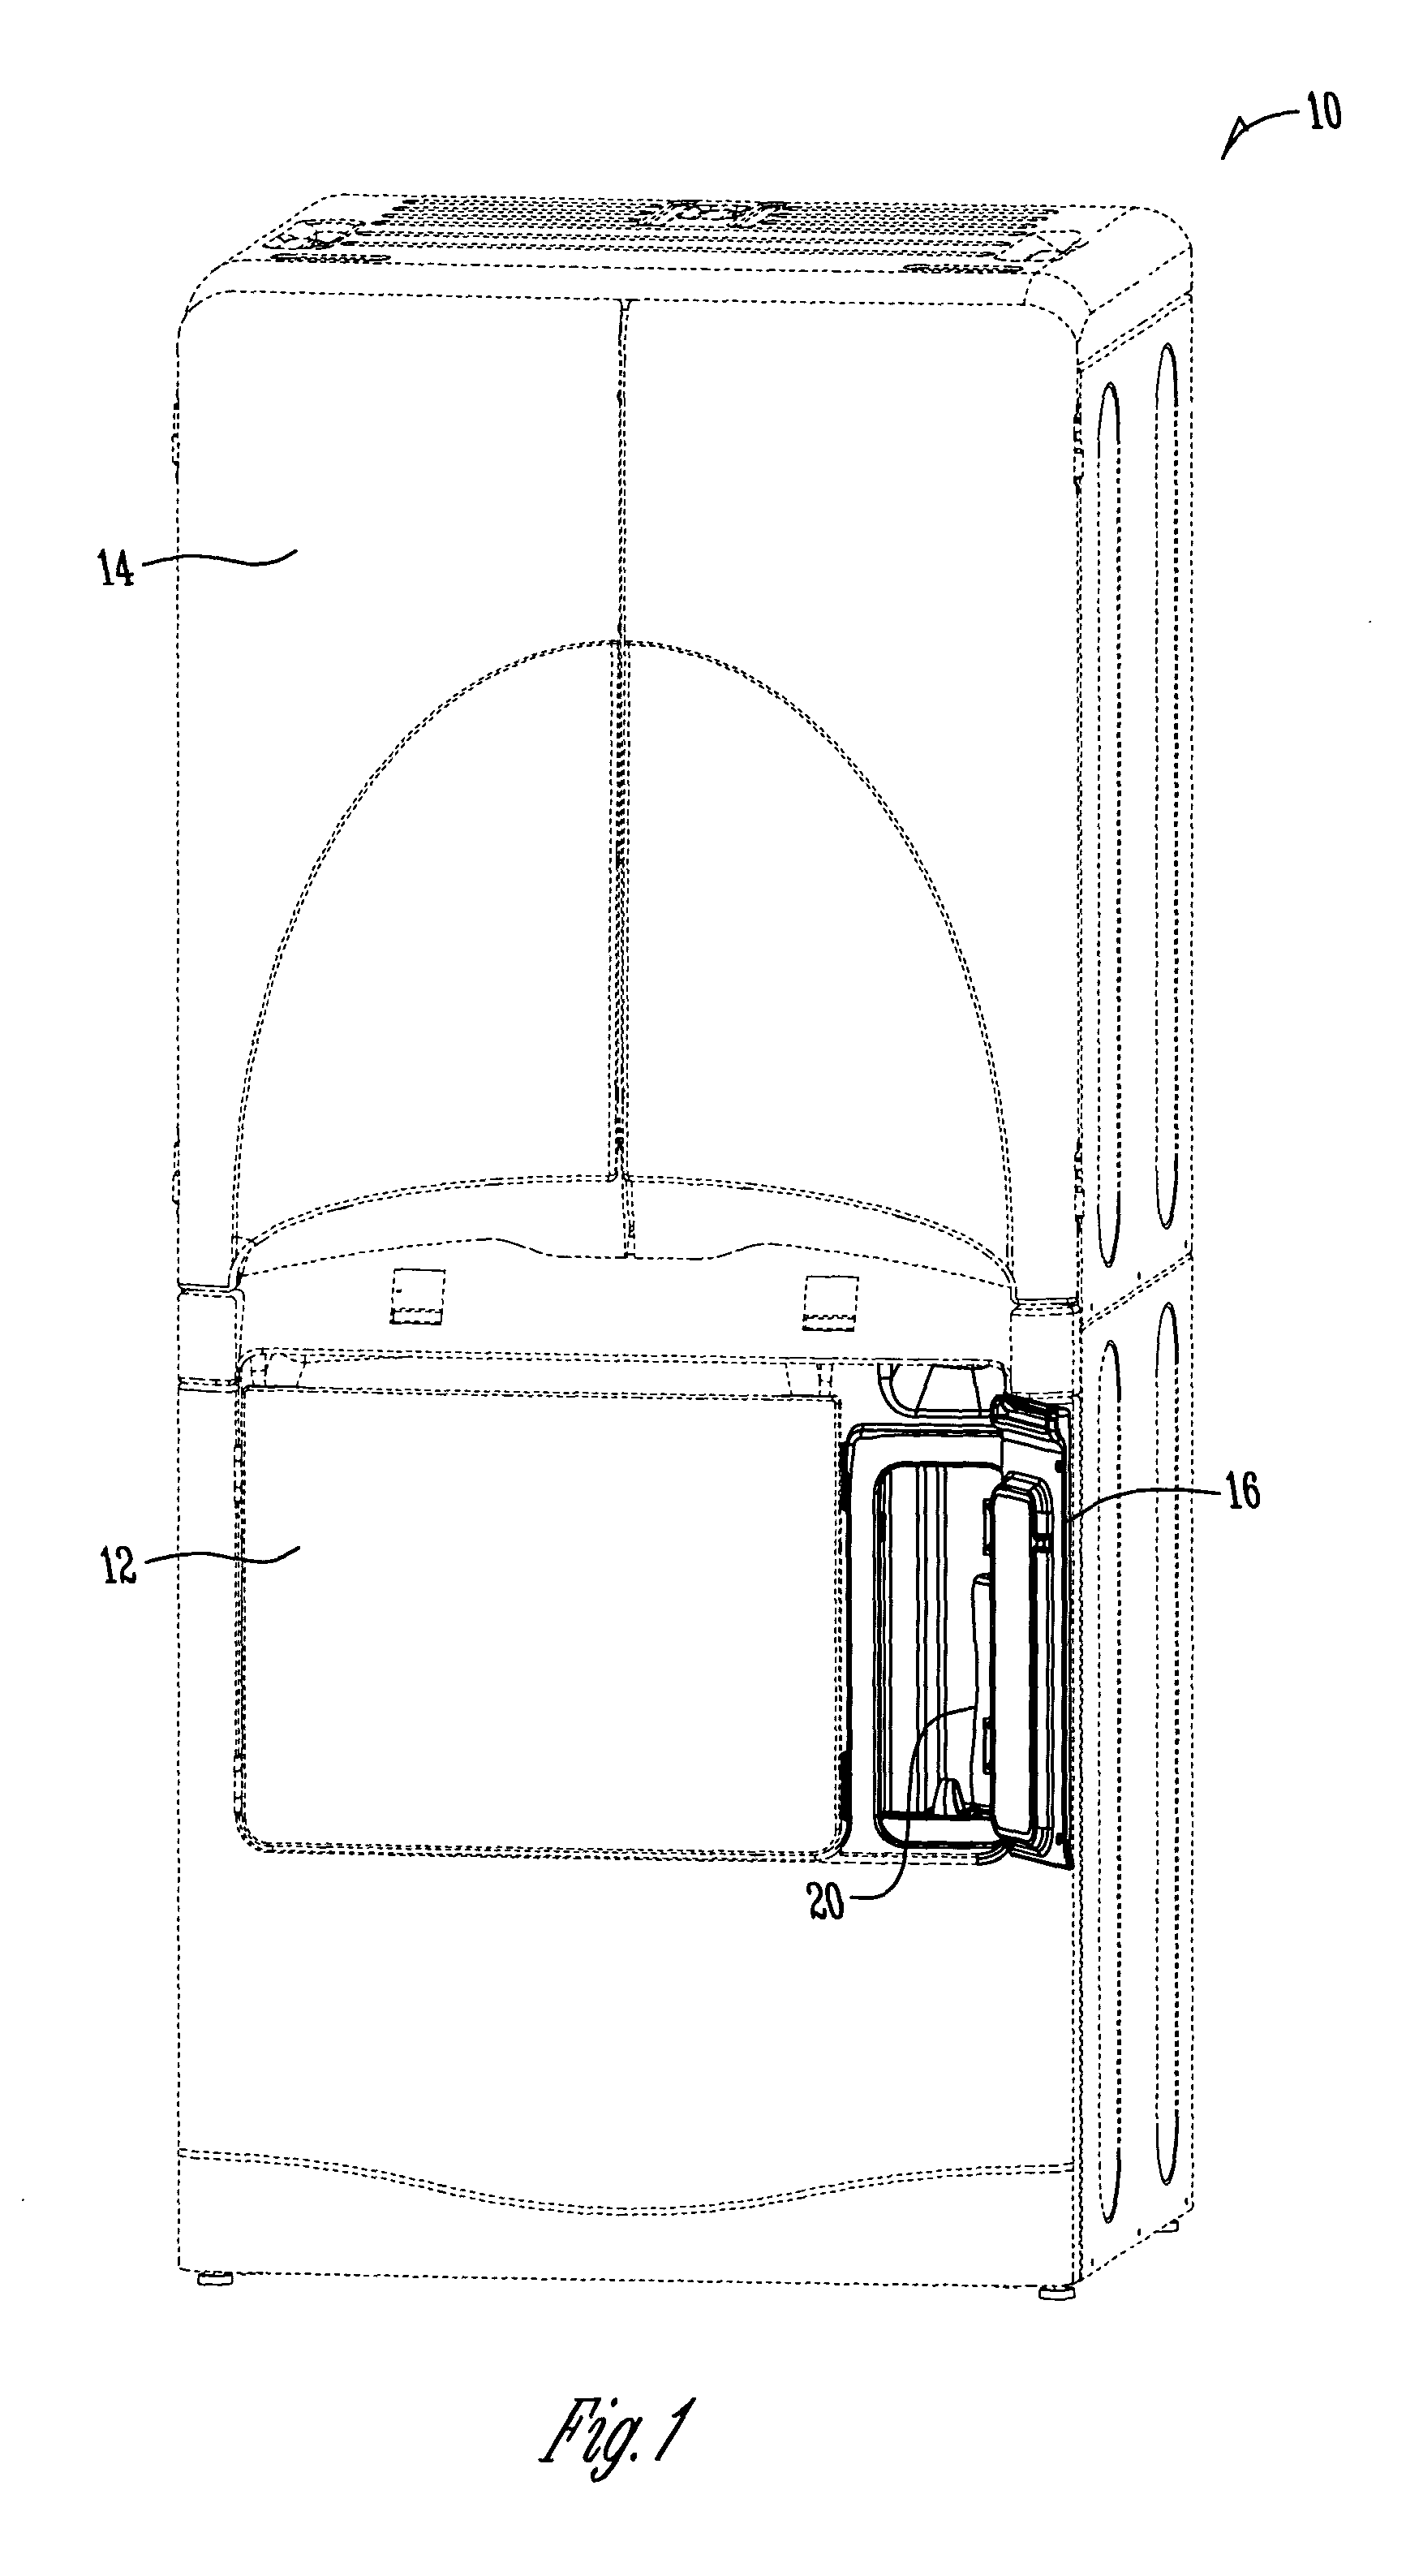 Delayed flow water reservoir for a clothes drying cabinet and method of use